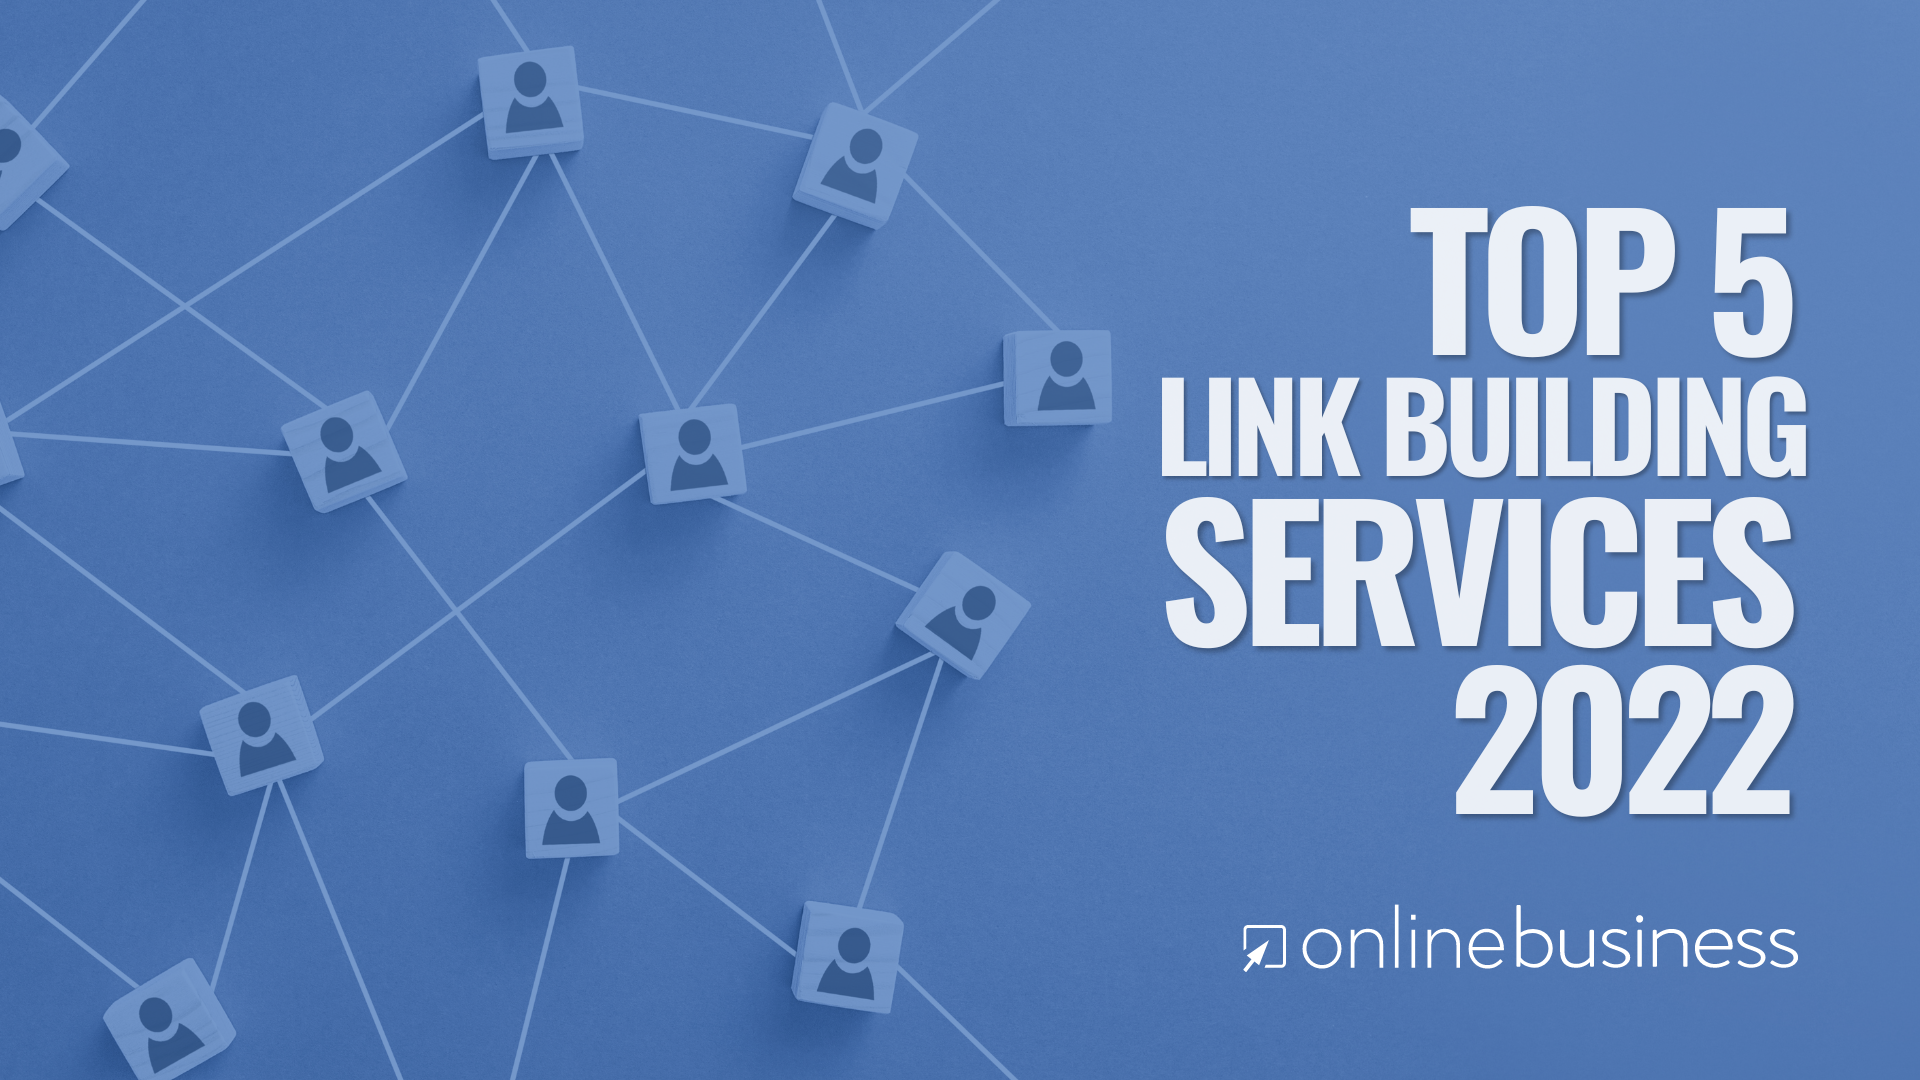 OnlineBusiness.com Lists the Top 5 Link Building Services for 2022